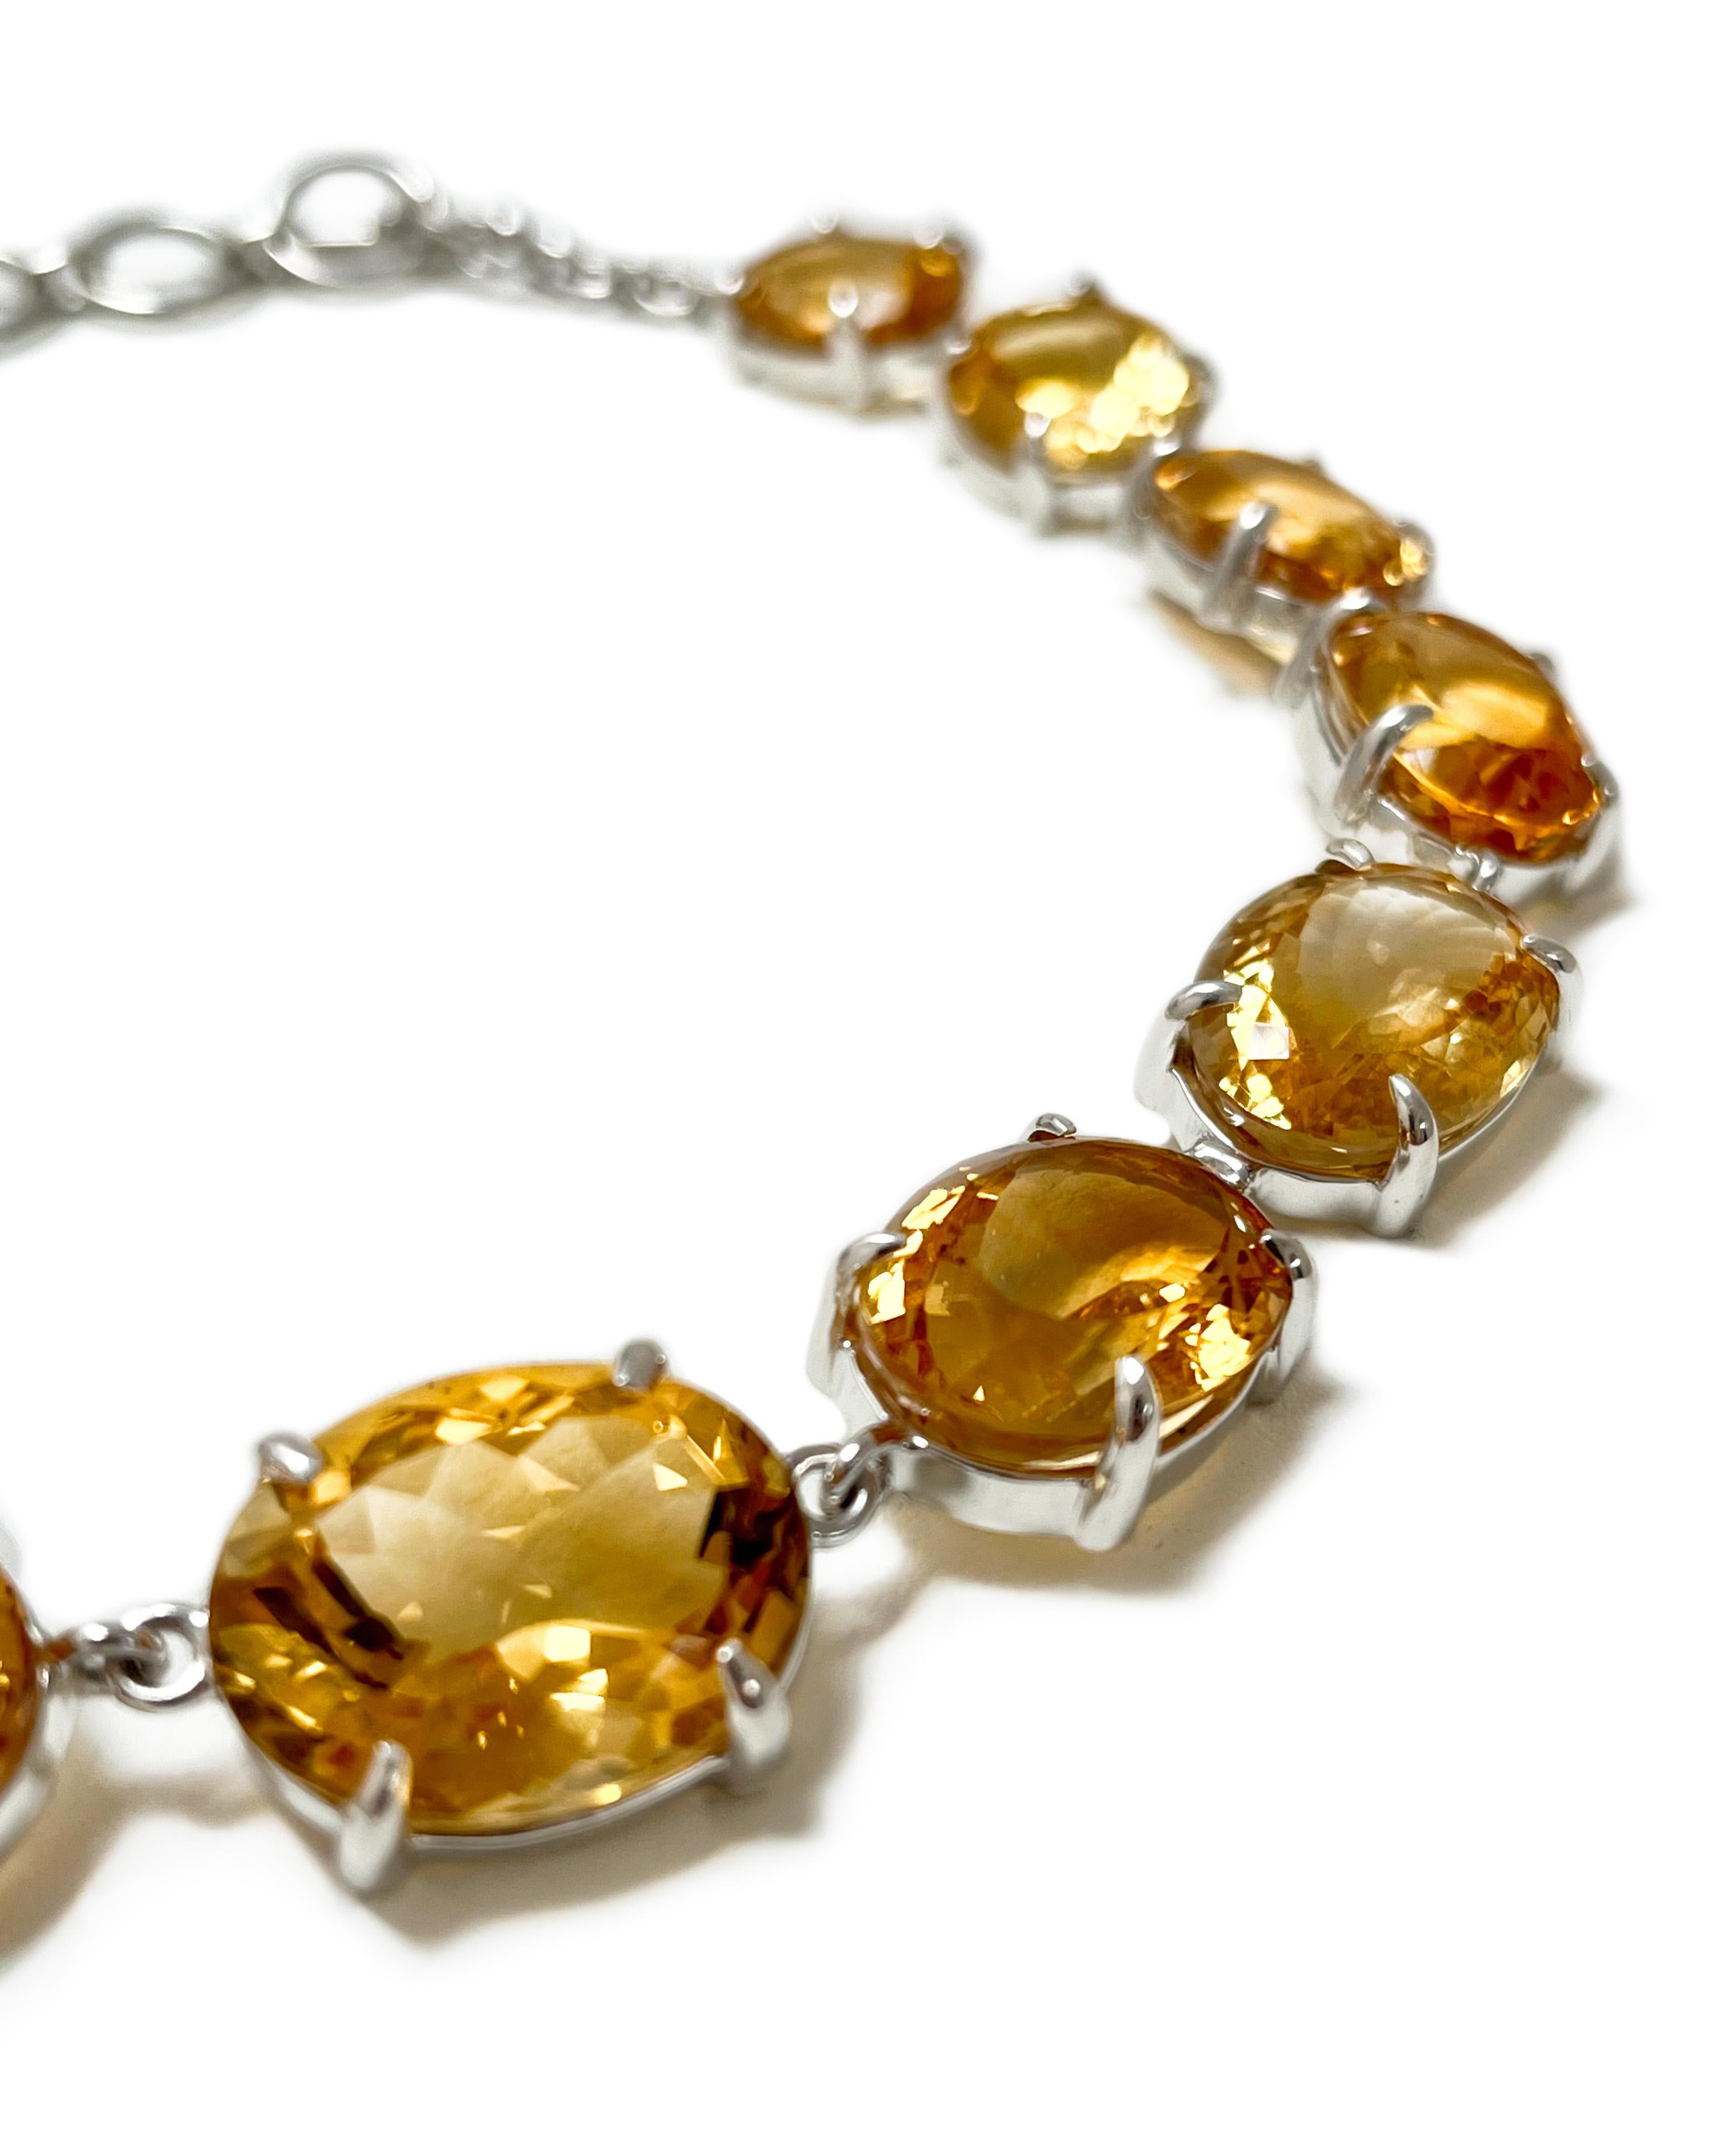 Intention: Like the Sun

Design: You'll radiate brightness and warmth wearing this jewel-forward necklace. Large graduated citrine stones wrap your neckline and secure with a toggle clasp. Set in Argentium silver, so you won't have to worry about